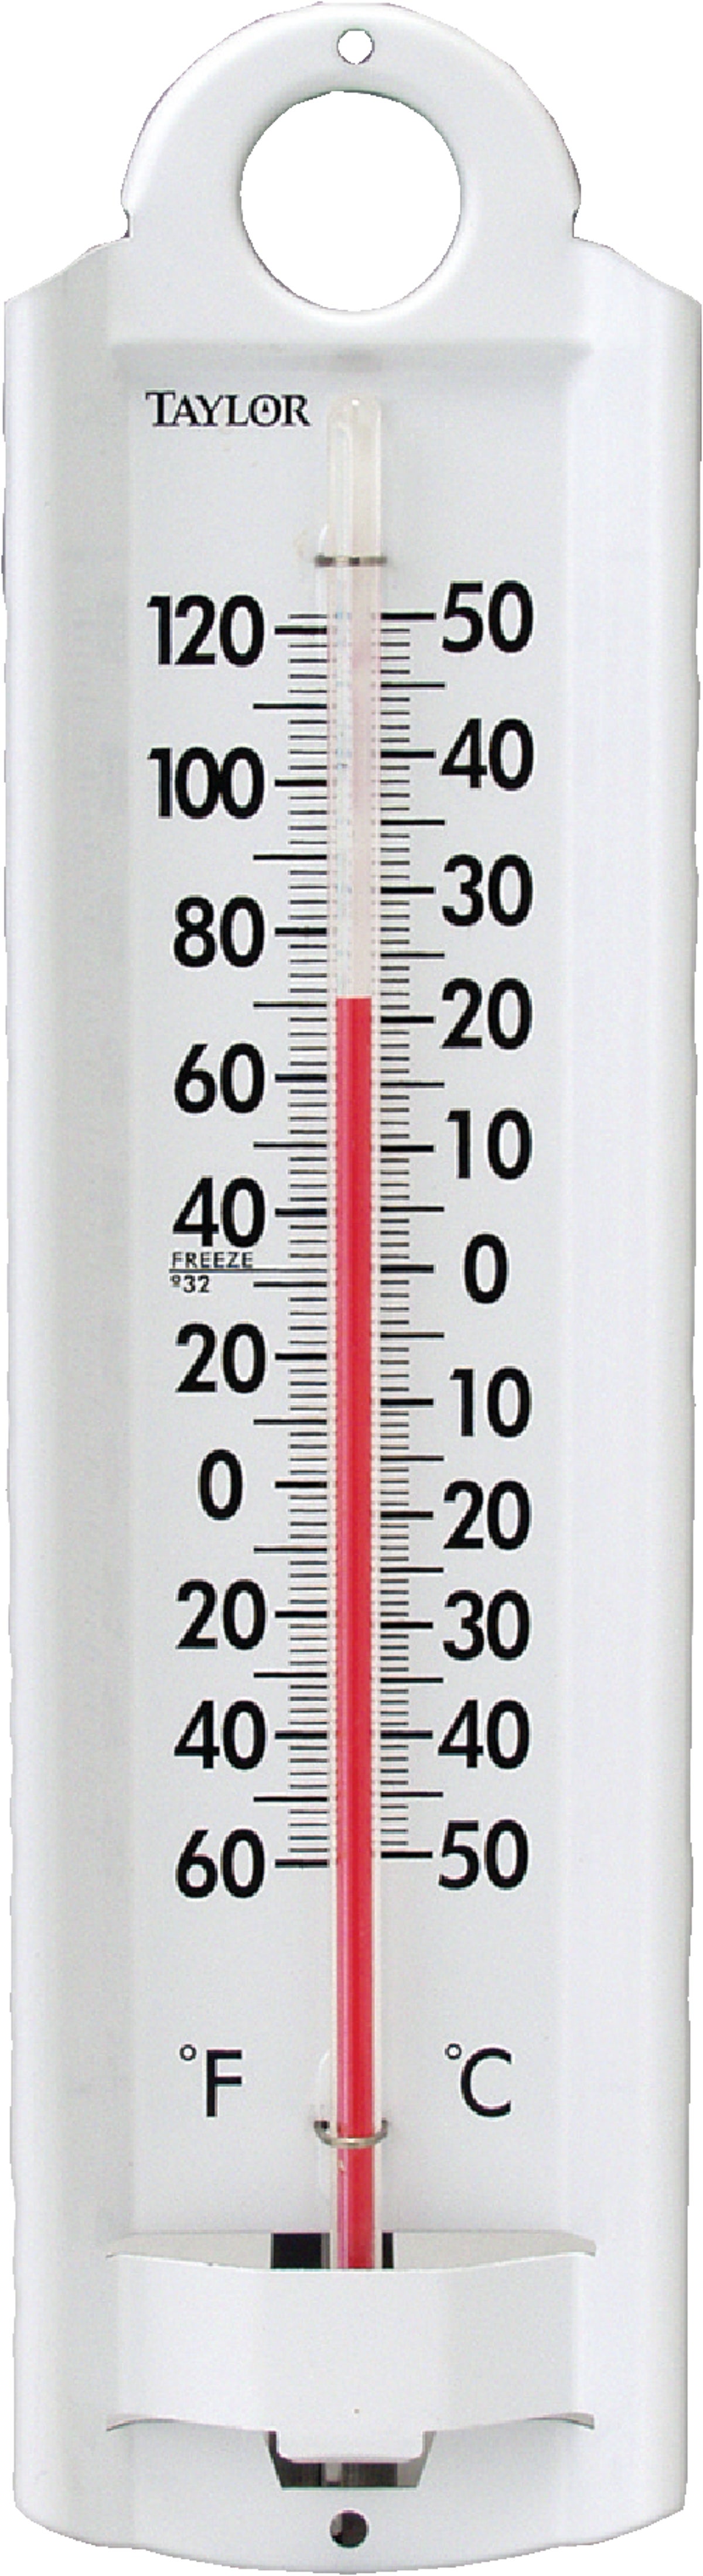 AcuRite 00782A2 Wireless Indoor/Outdoor Thermometer, Temperature,White, 0.4